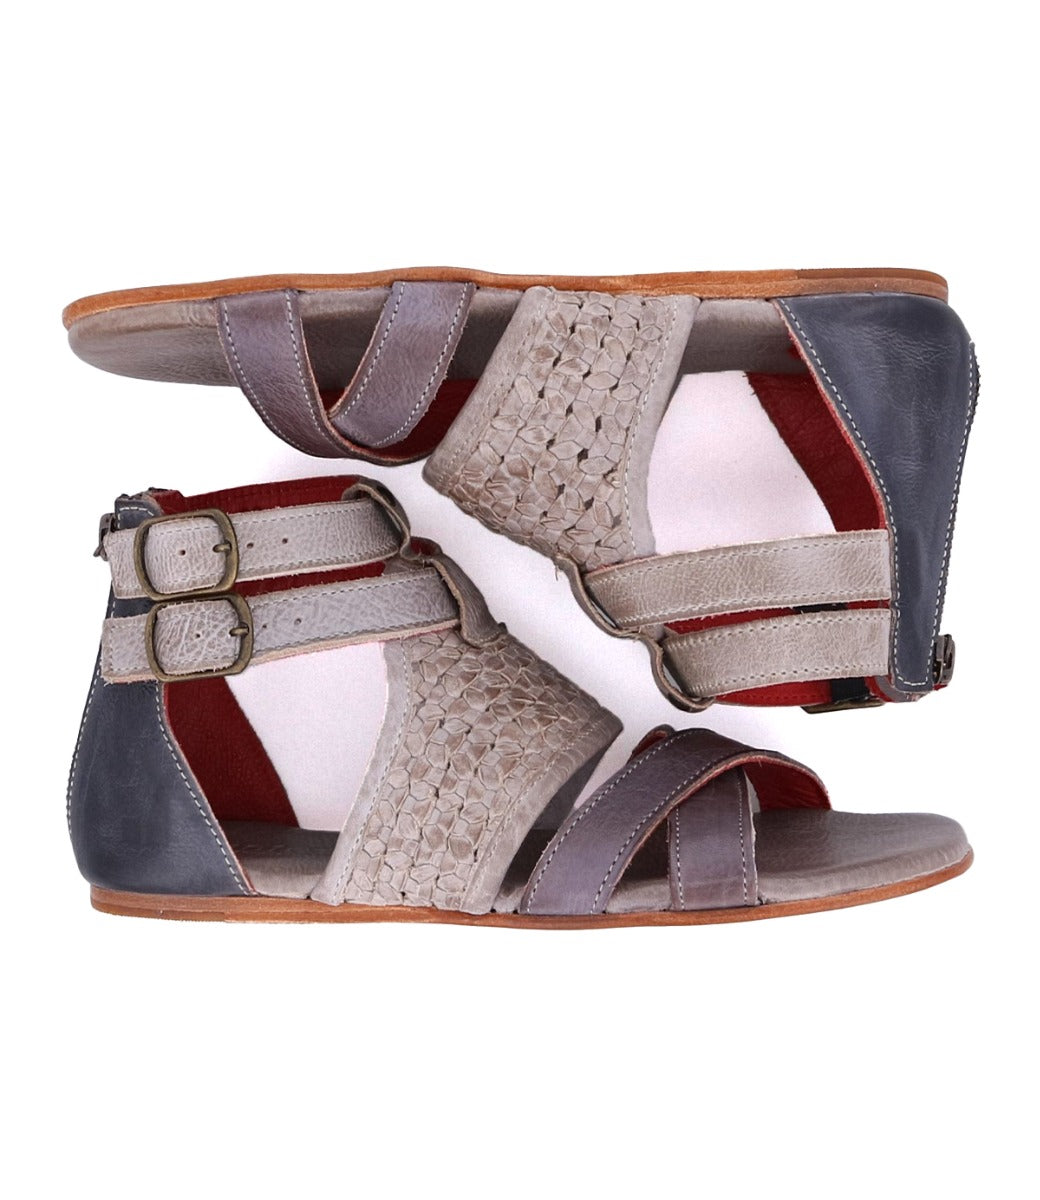 A pair of Capriana women's sandals with straps and buckles by Bed Stu.